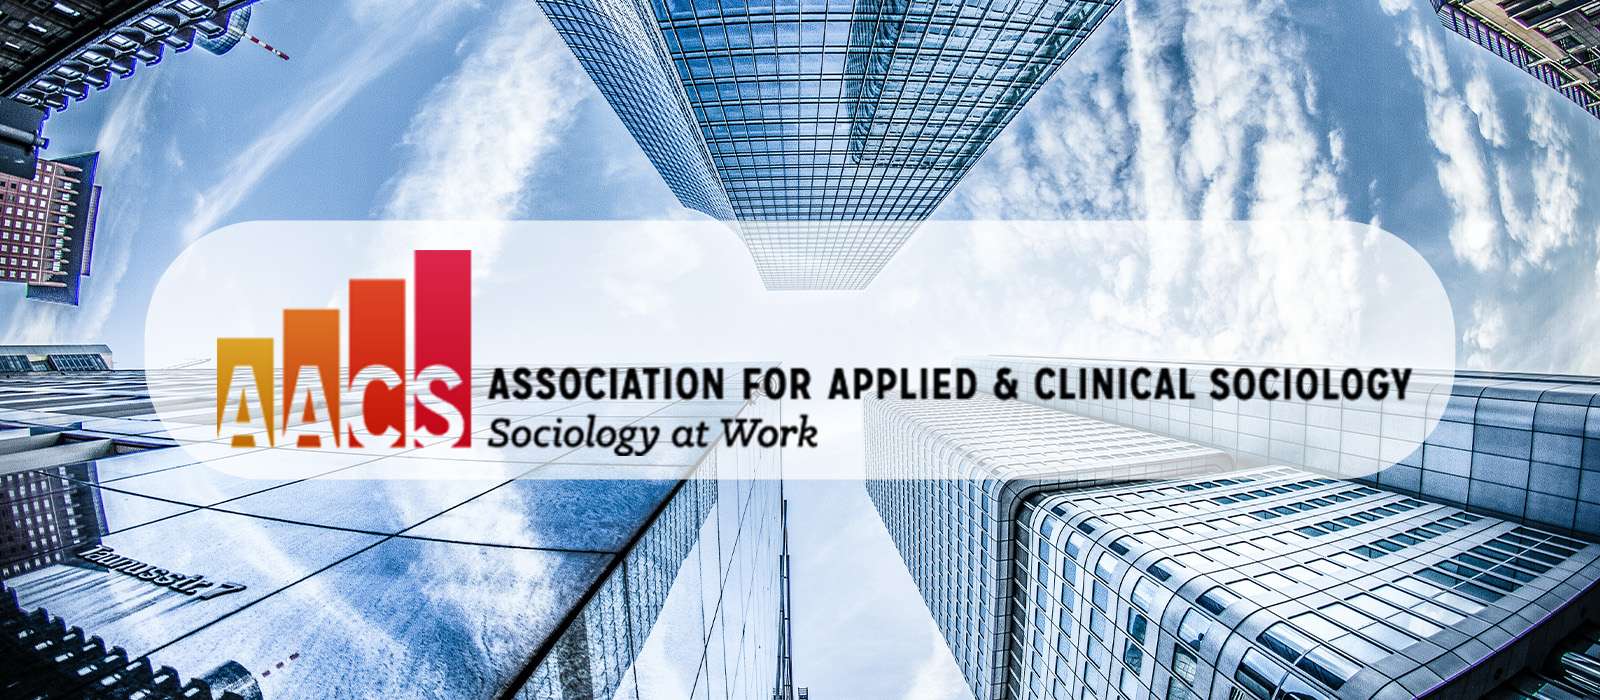 A graphic us the logo of the Association for Applied and Clinical Sociology